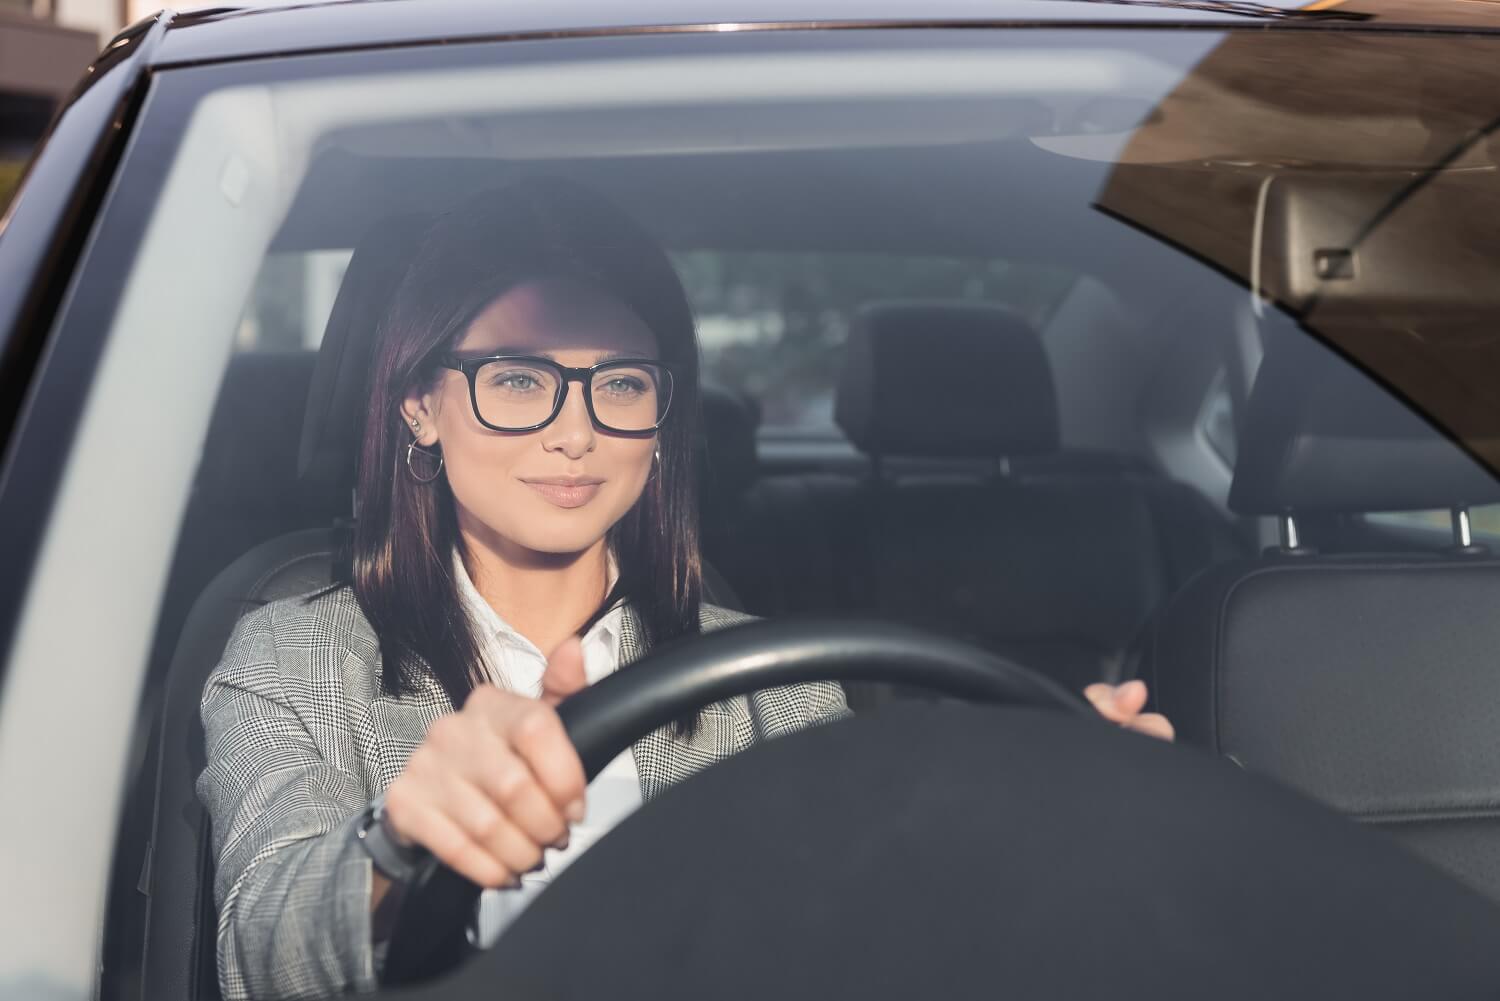 Eyesight Requirements for Driving in the UK